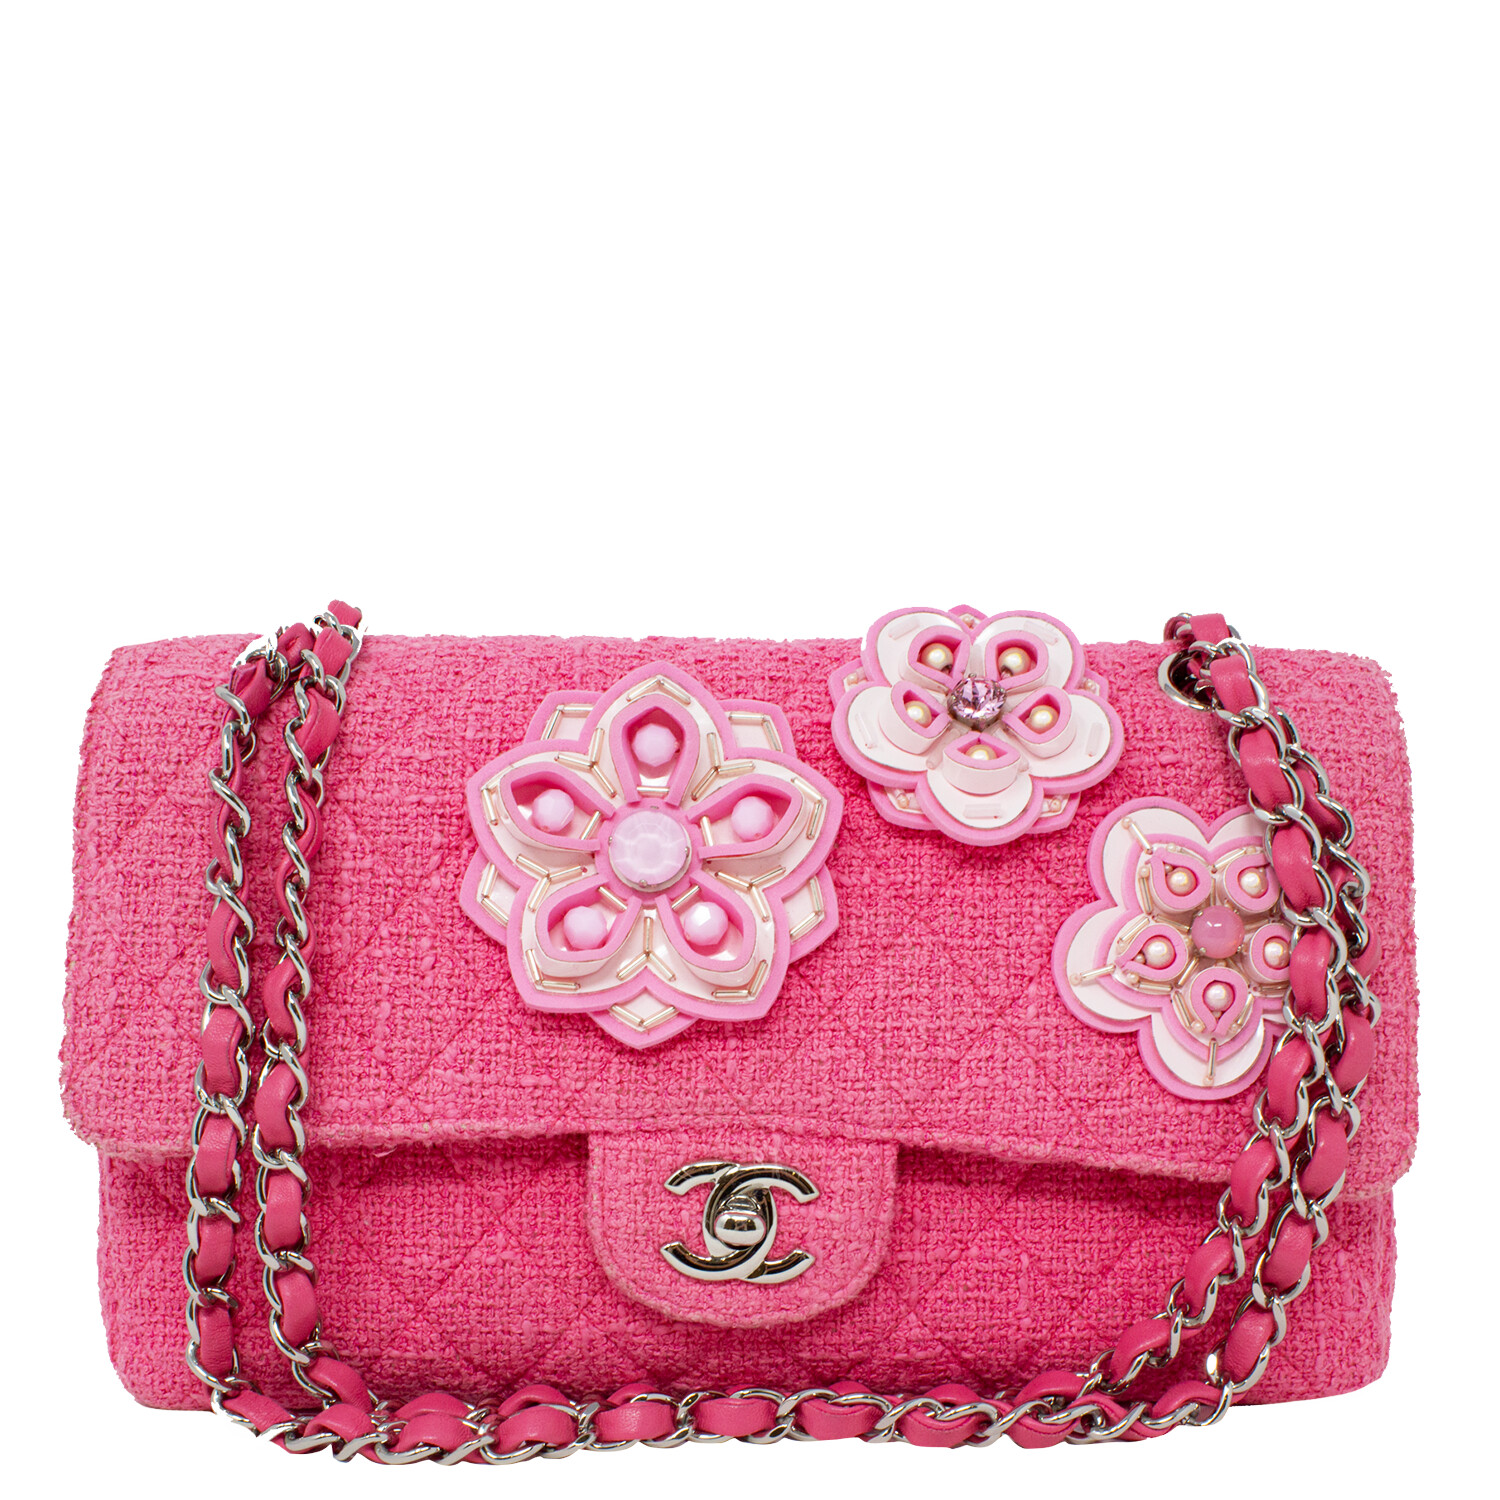 CHANEL Floral Bags  Handbags for Women  Authenticity Guaranteed  eBay